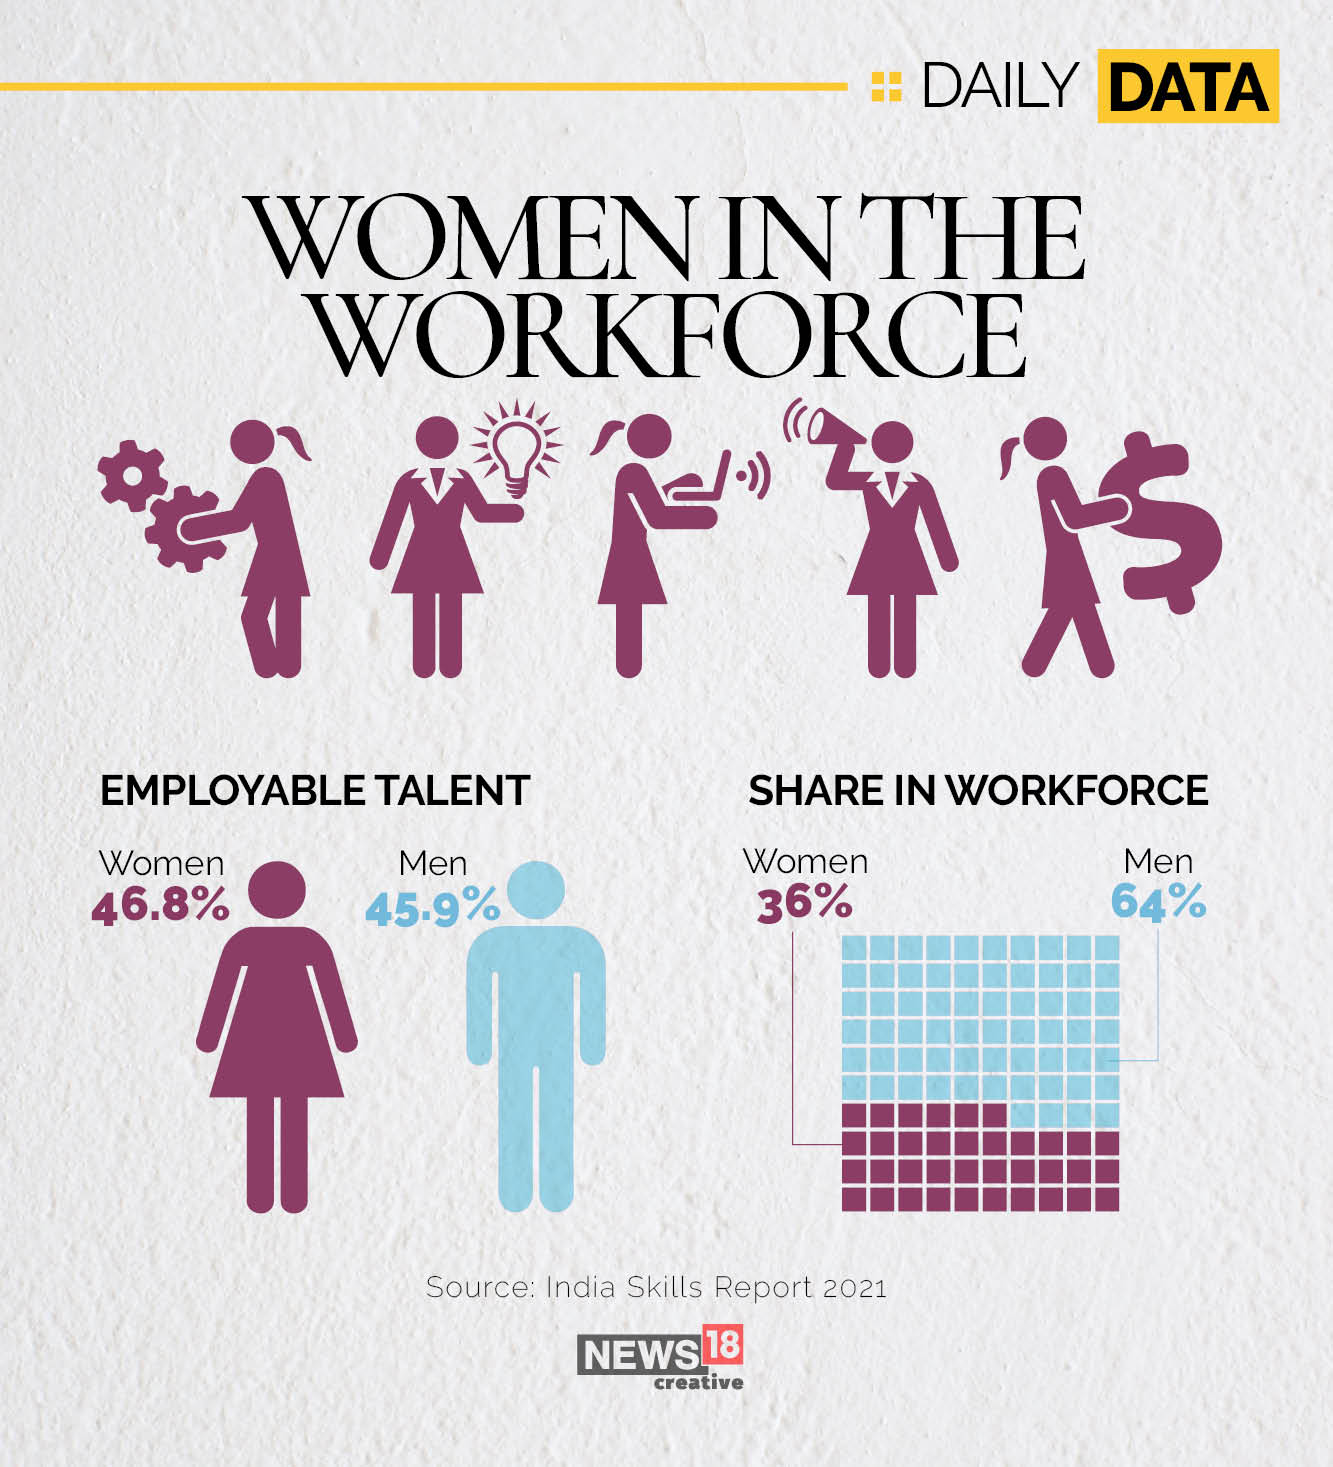 Marginally more employable talent among women in India but less share in the workforce